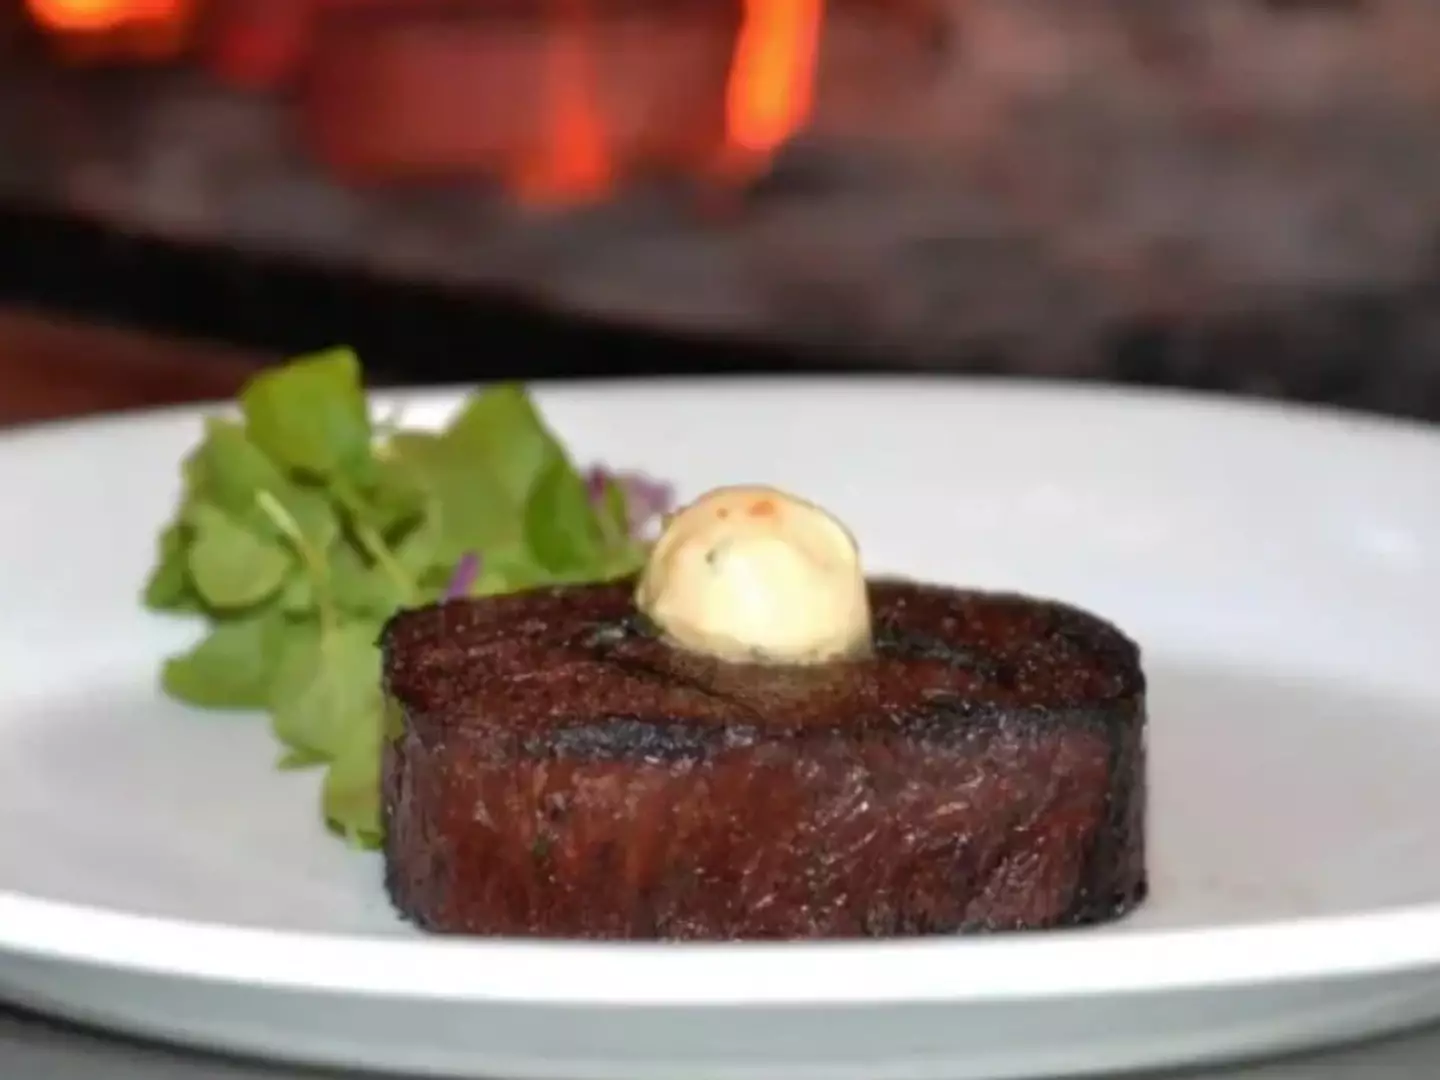 A steakhouse in Florida has added the plant-based option to its menu.